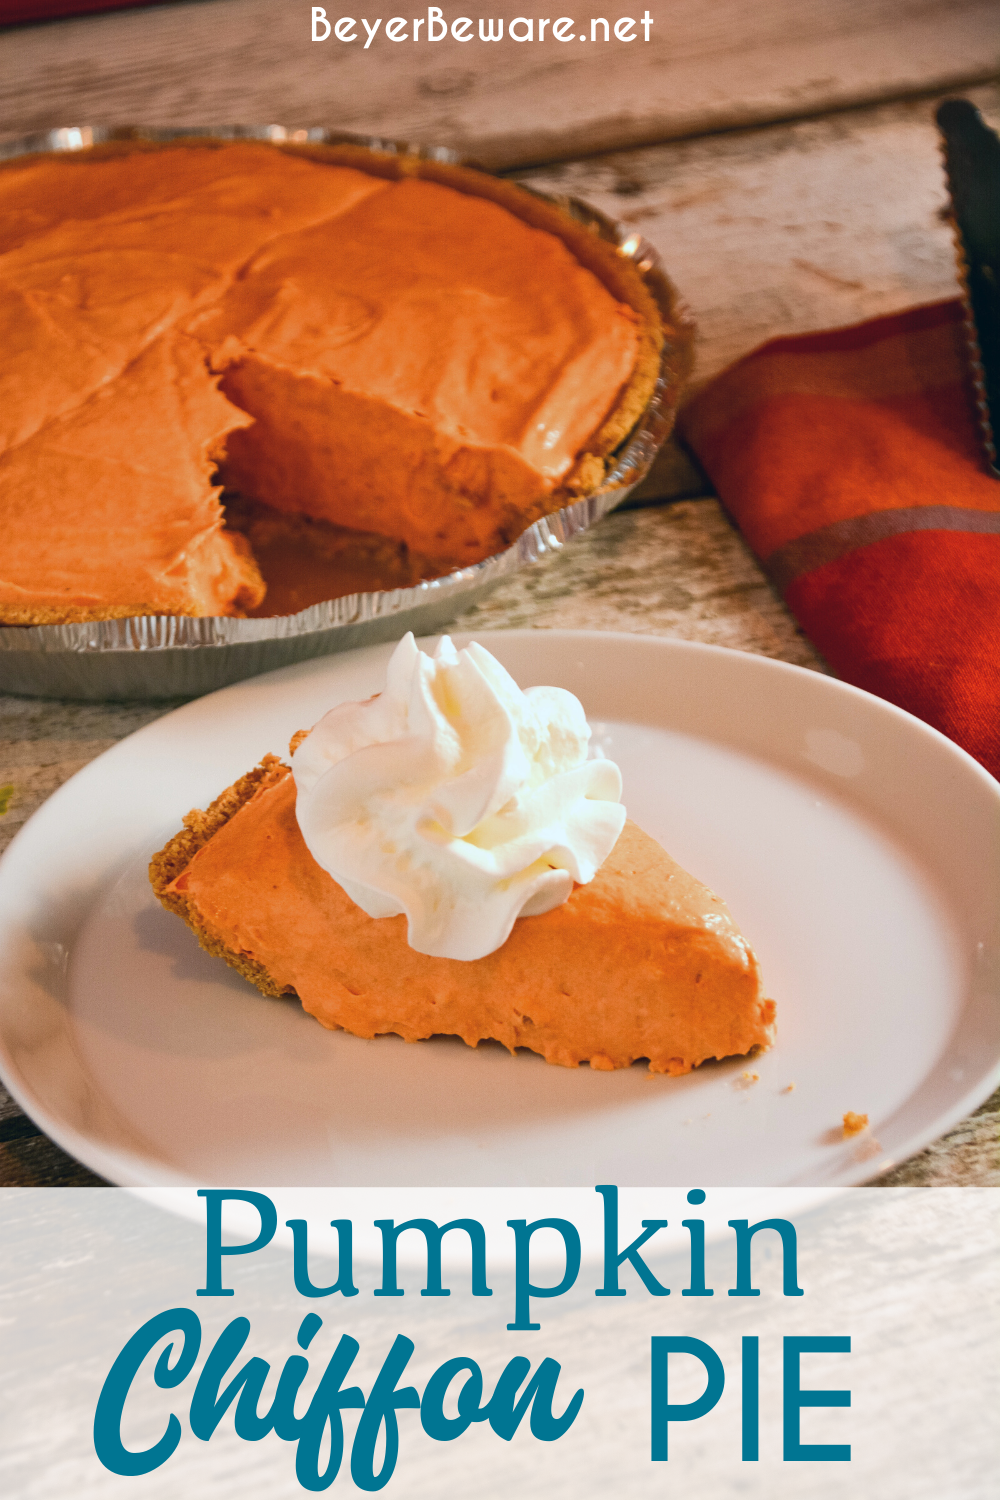 This Pumpkin Chiffon Pie recipe is the silky, creamy no-bake version of a traditional pumpkin pie, made with real pumpkin and pudding in a graham cracker crust.